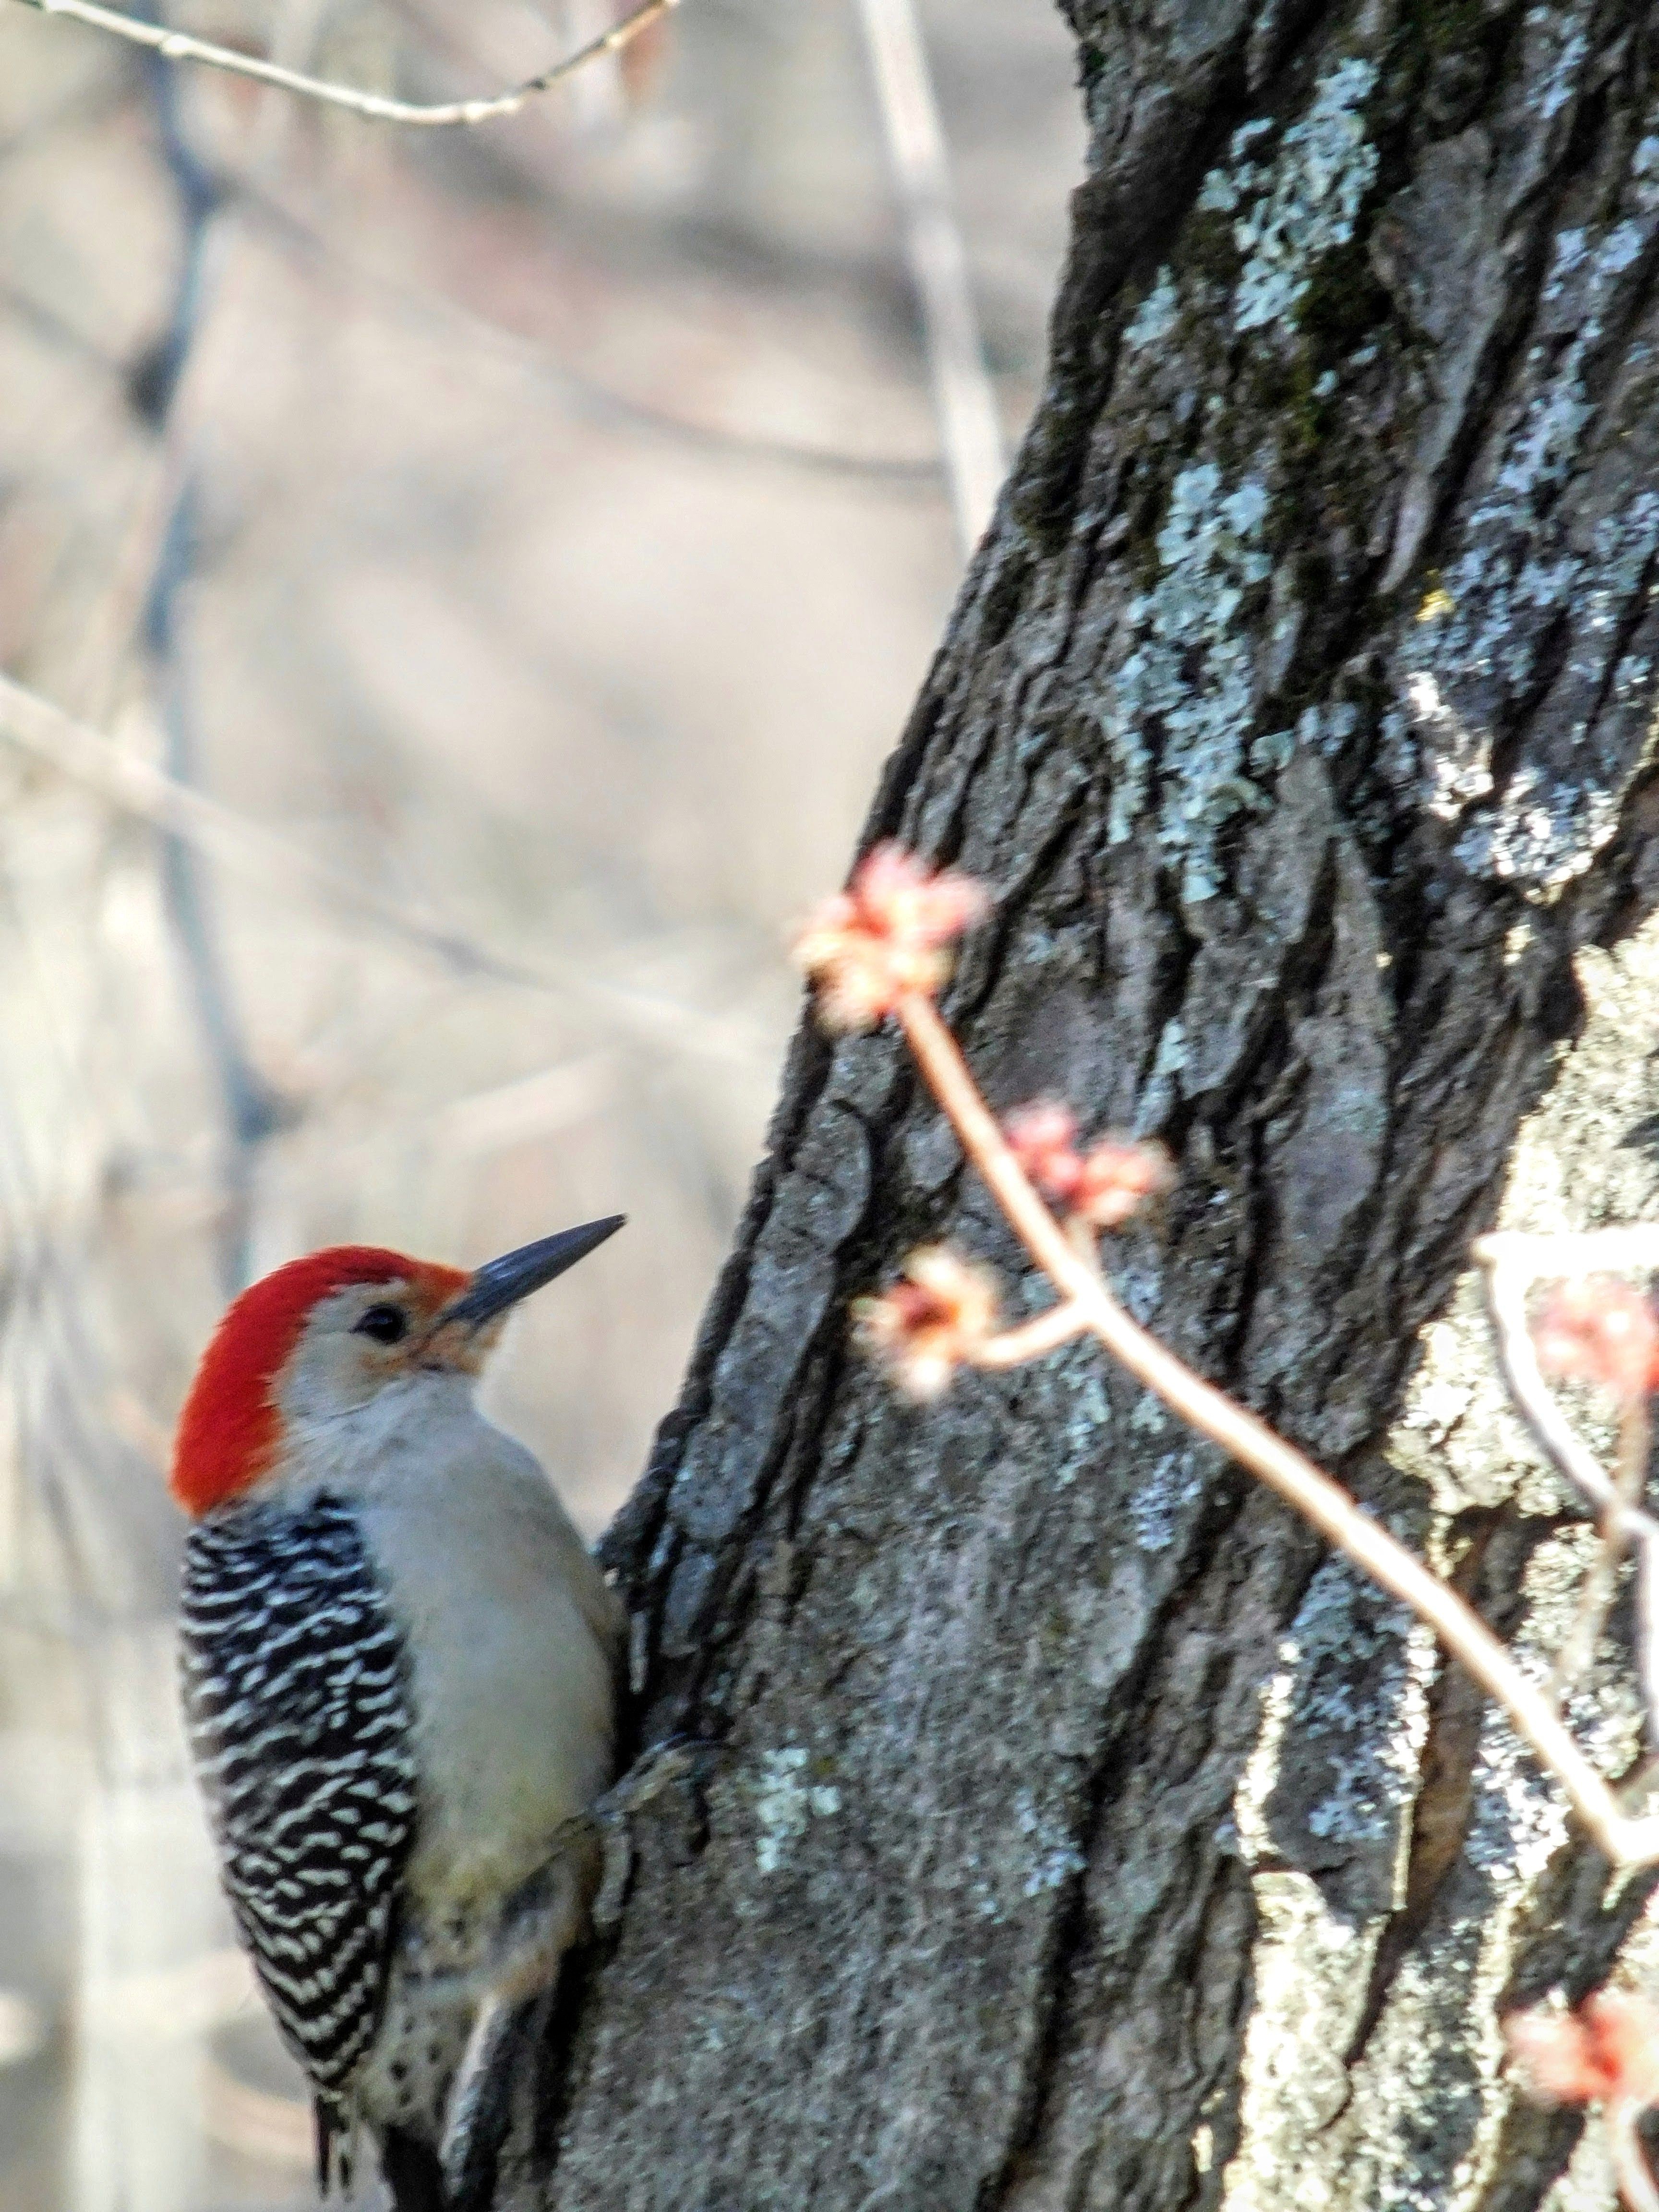 He s still small but bright in color Red Belly Woodpecker photo S